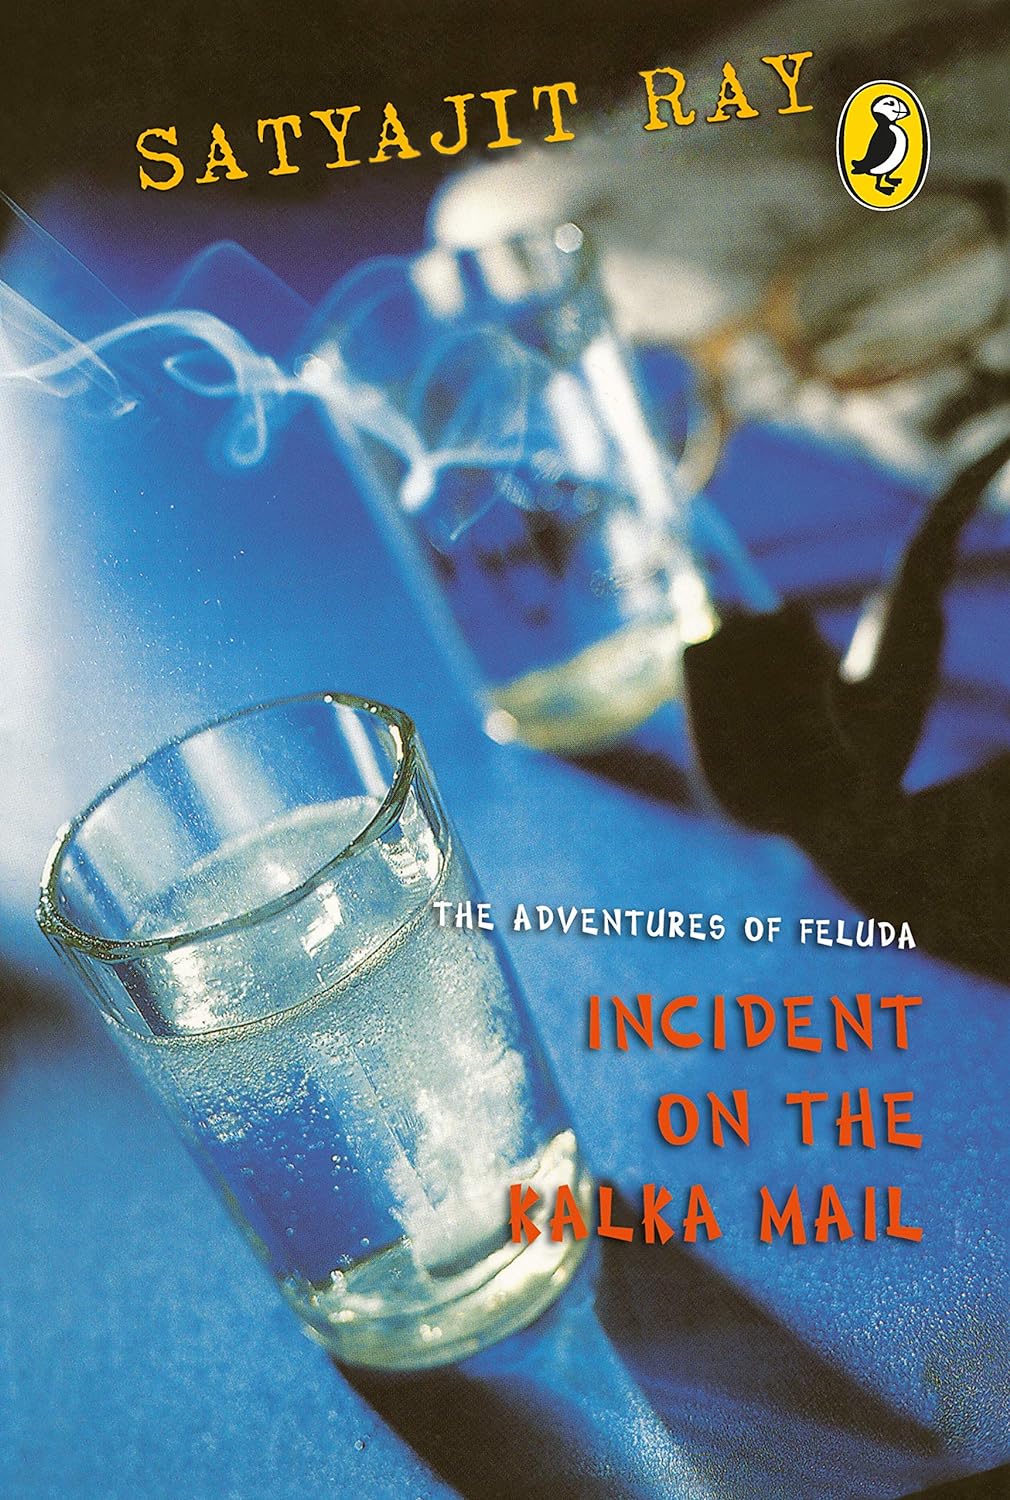 The Adventures of Feluda: Incident on the Kalka Mall